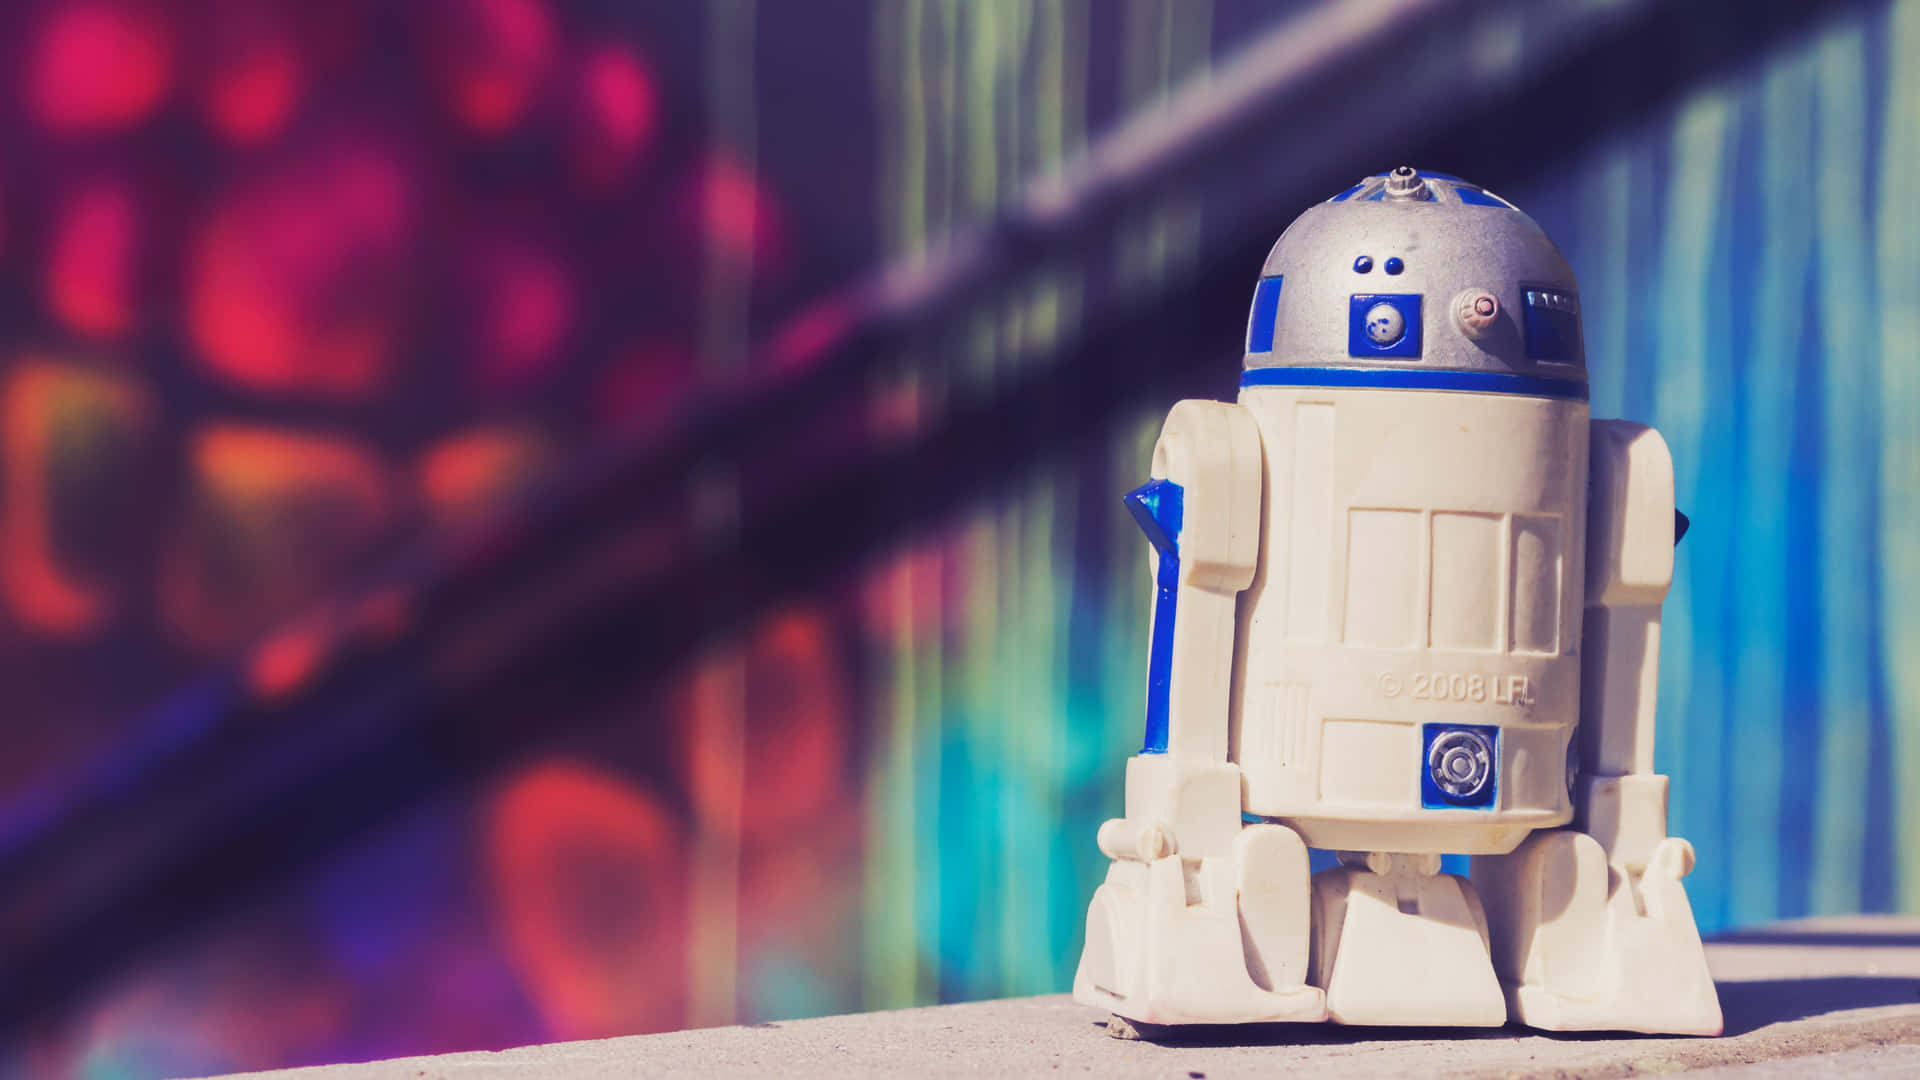 R2-D2, the lovable droid from Star Wars Wallpaper